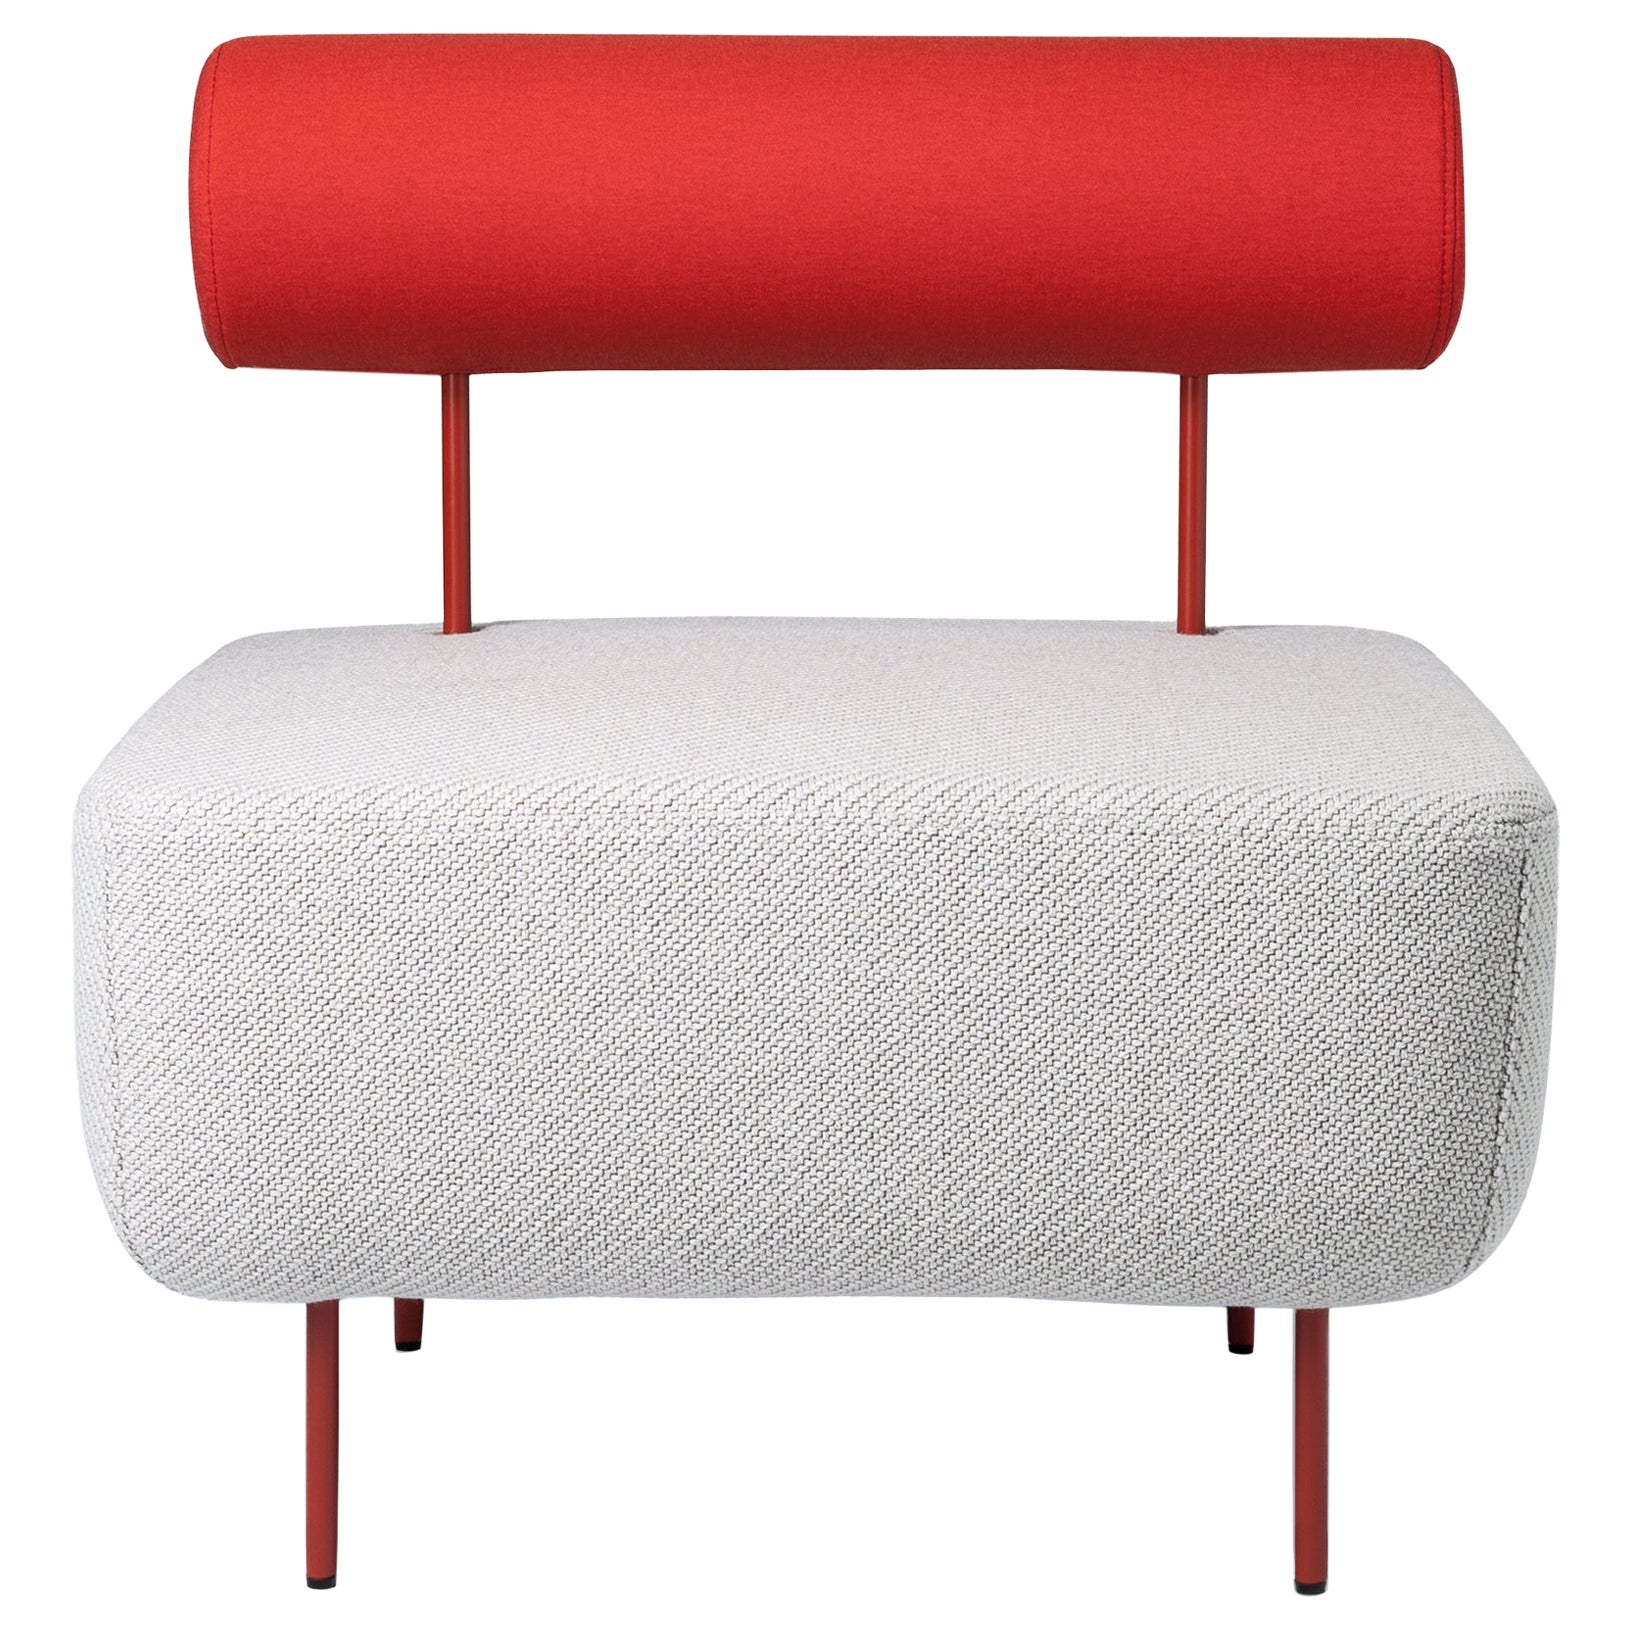 Petite Friture Medium Hoff Armchair in White and Red by Morten & Jonas, 2015